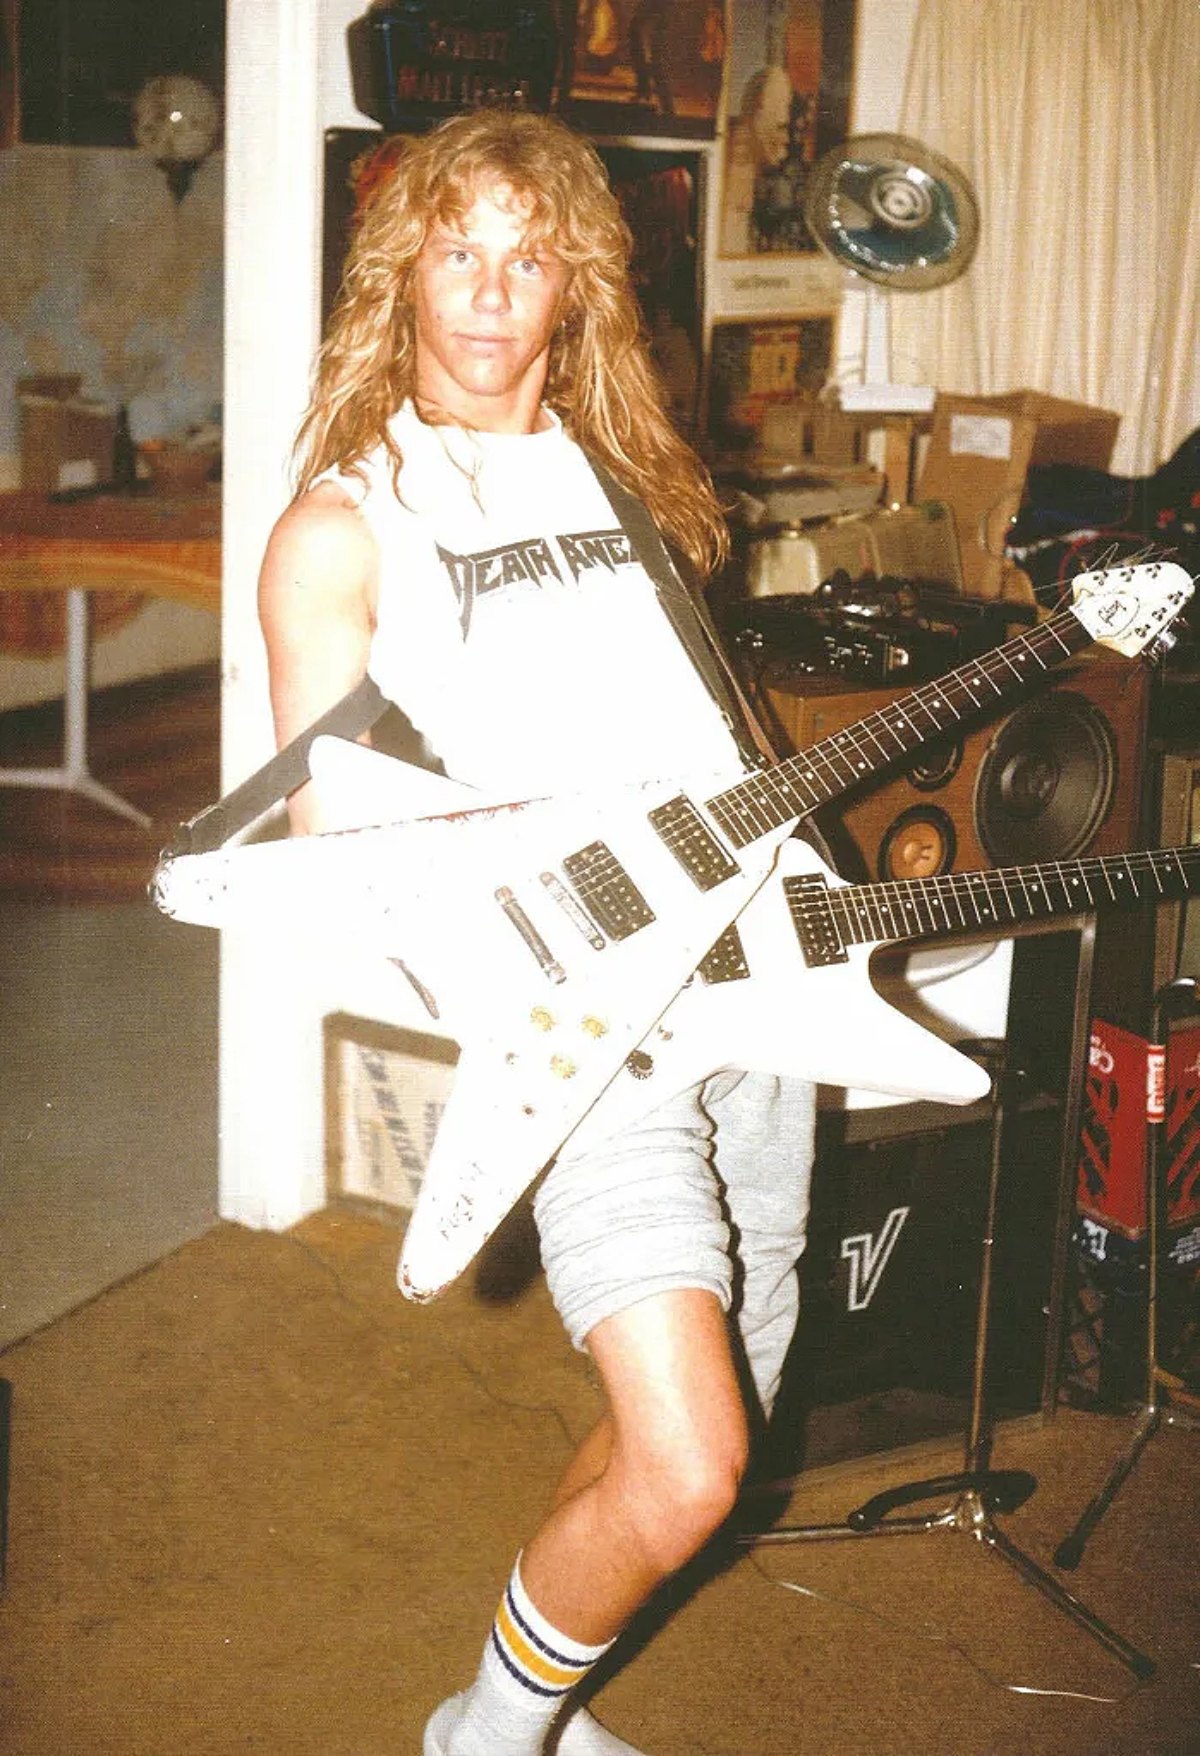 James Hetfield in his youth